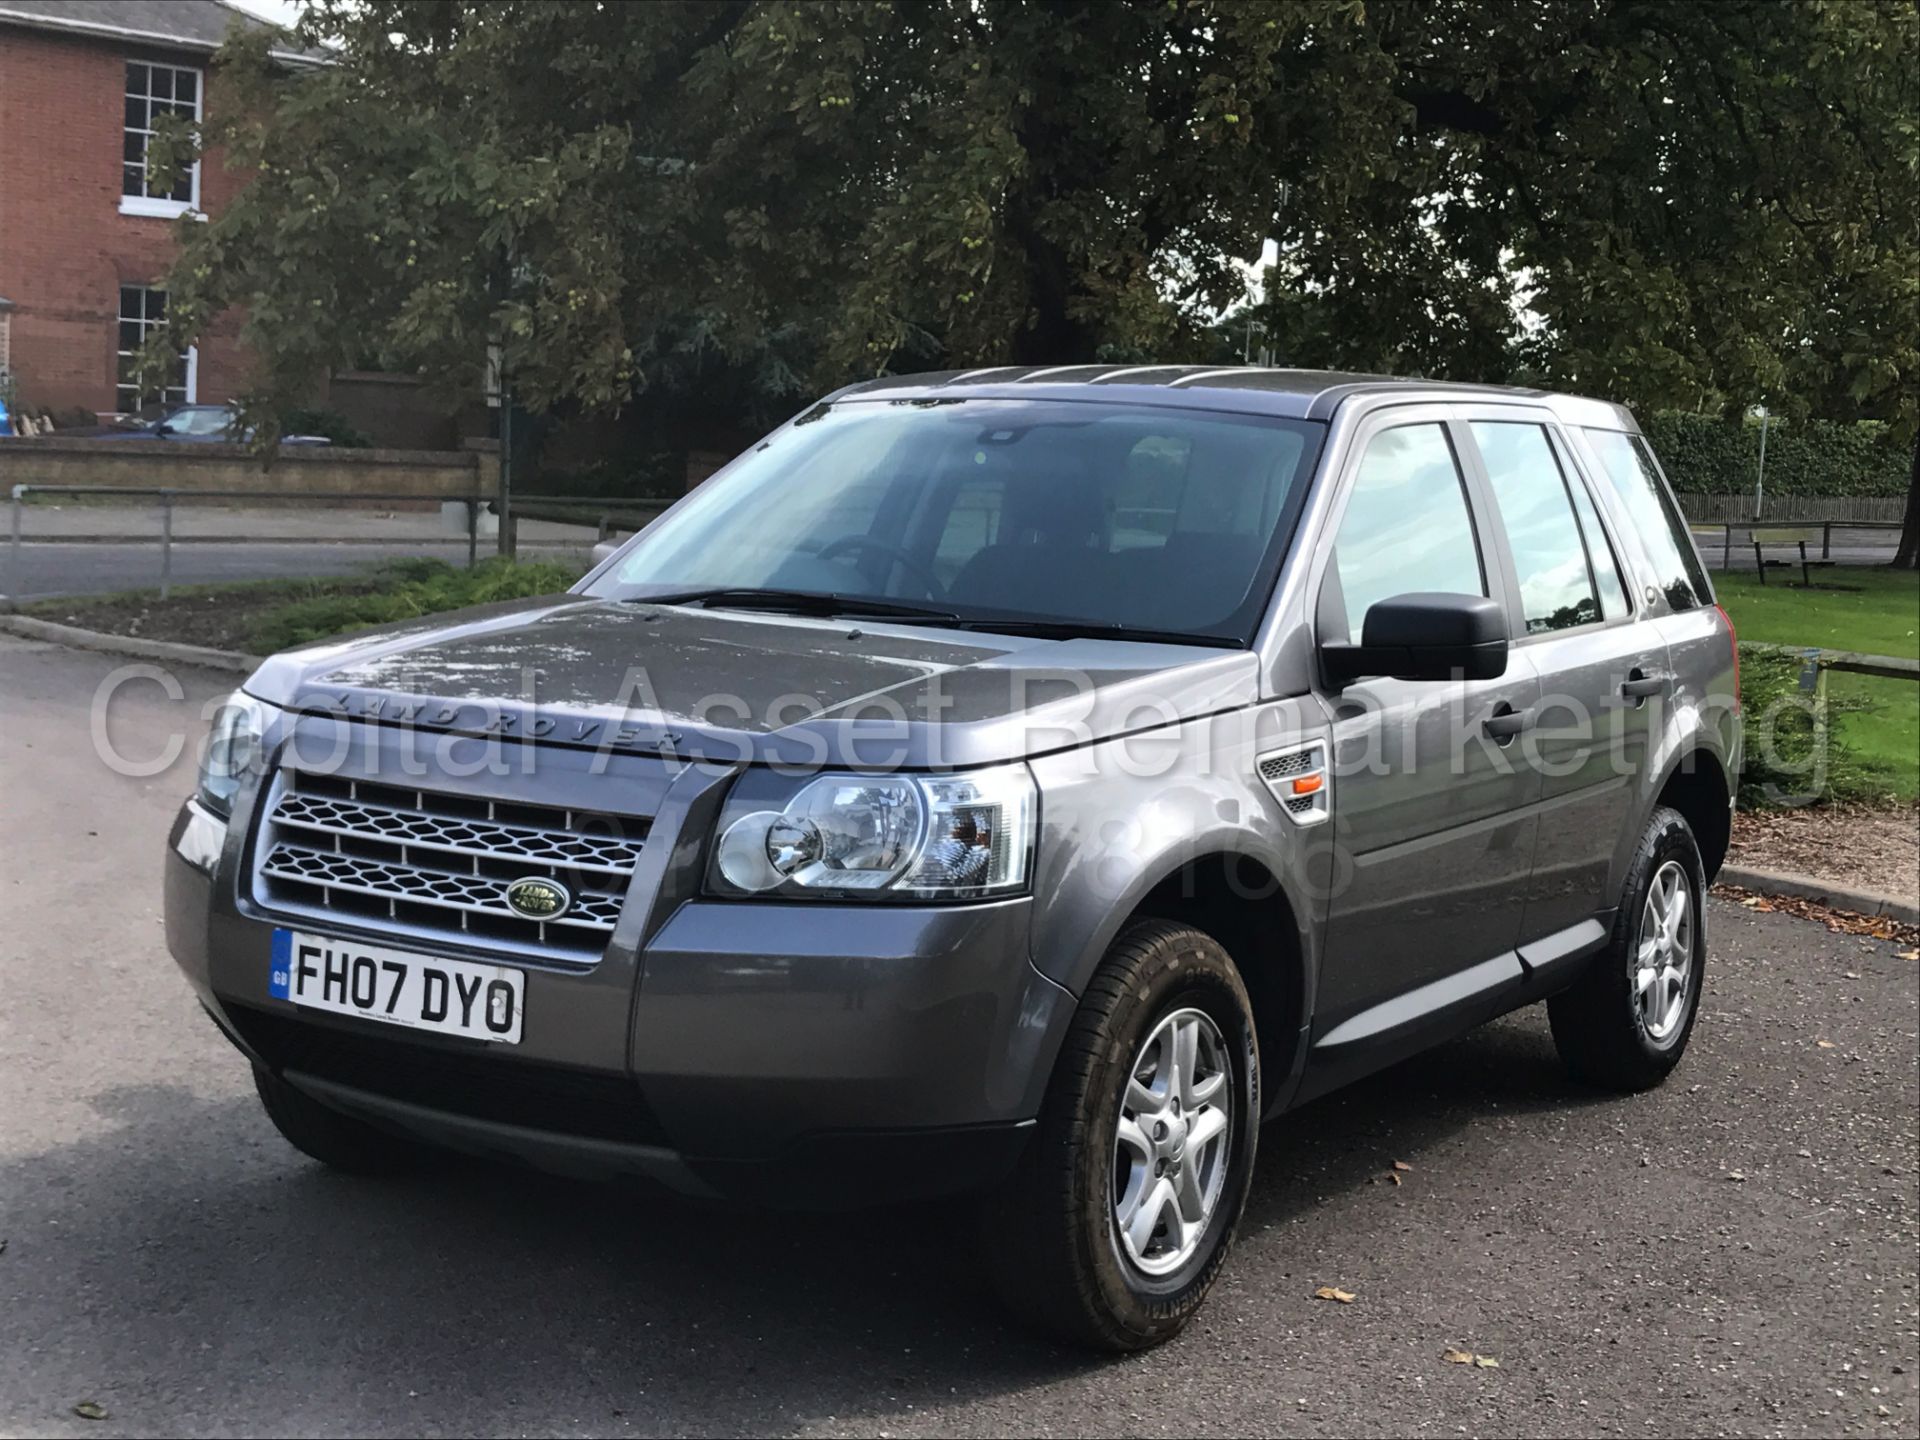 LAND ROVER FREELANDER (2007) '2.2 TD4 - AUTOMATIC - 161 BHP' **AIR CON** (NO VAT - SAVE 20%) - Image 4 of 28